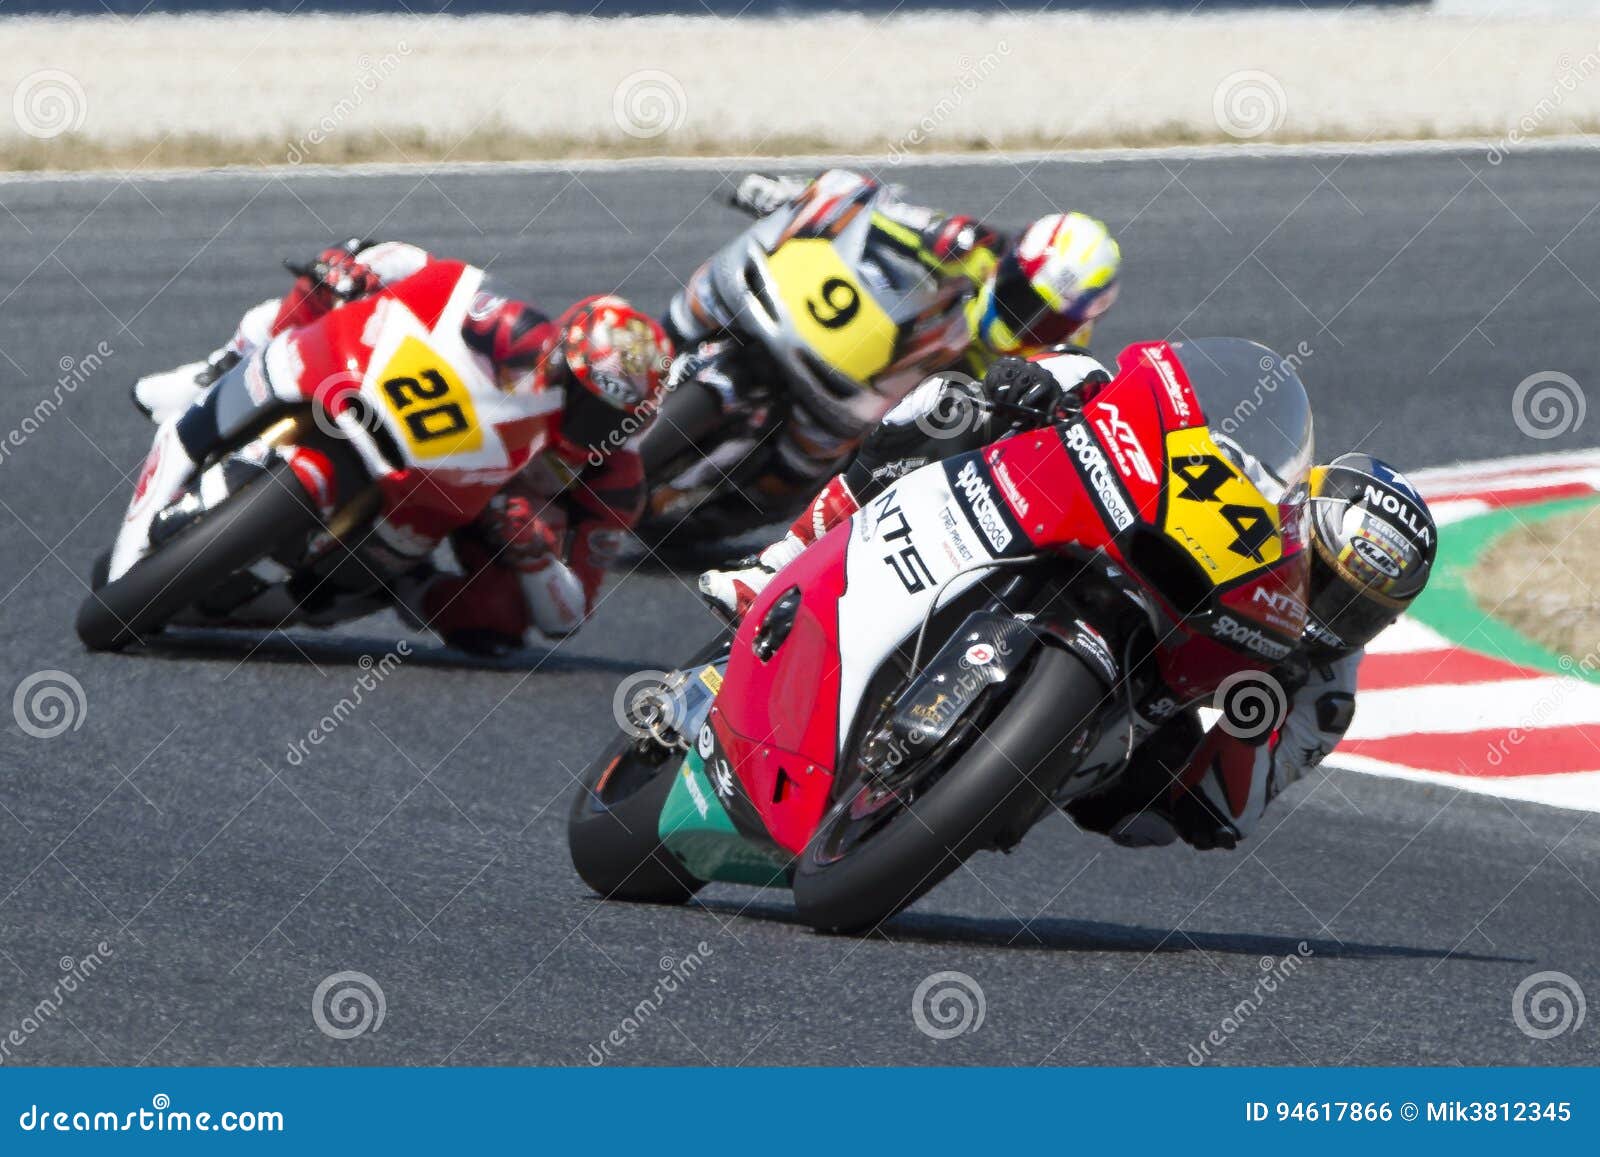 Driver Odendaal Steven Moto2 Nts Sportcode Team Editorial Photo Image Of Professional 17